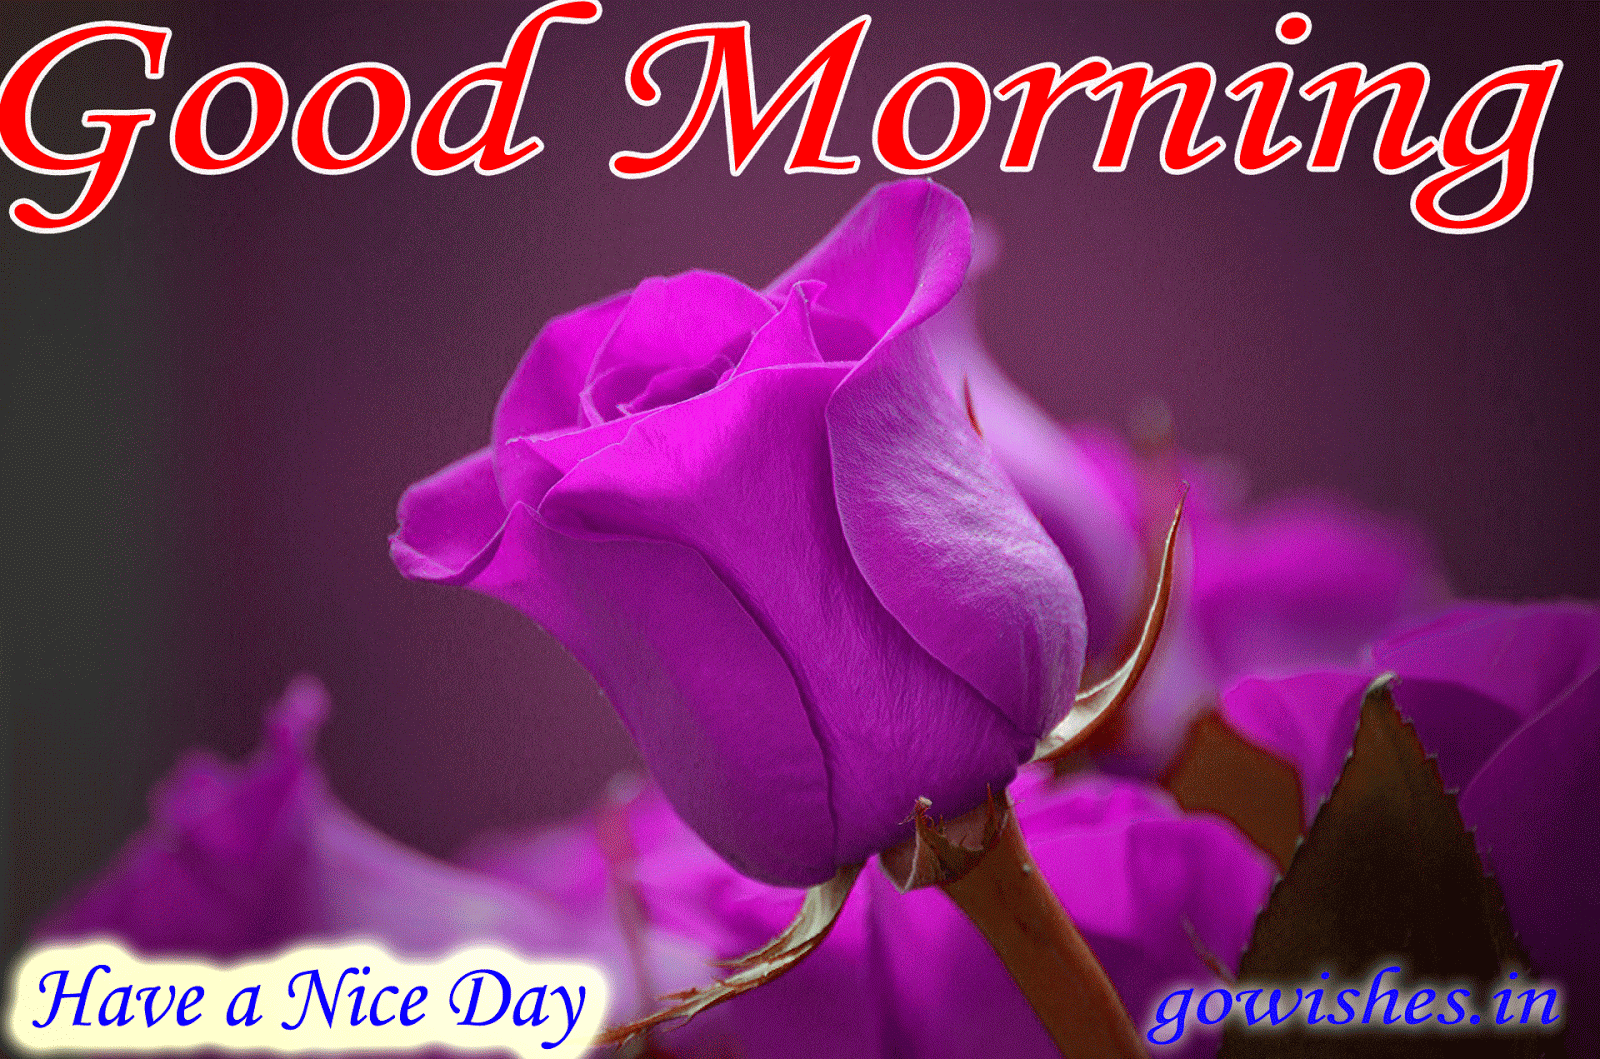 Good Morning Wishes Today - 1600x1059 Wallpaper 